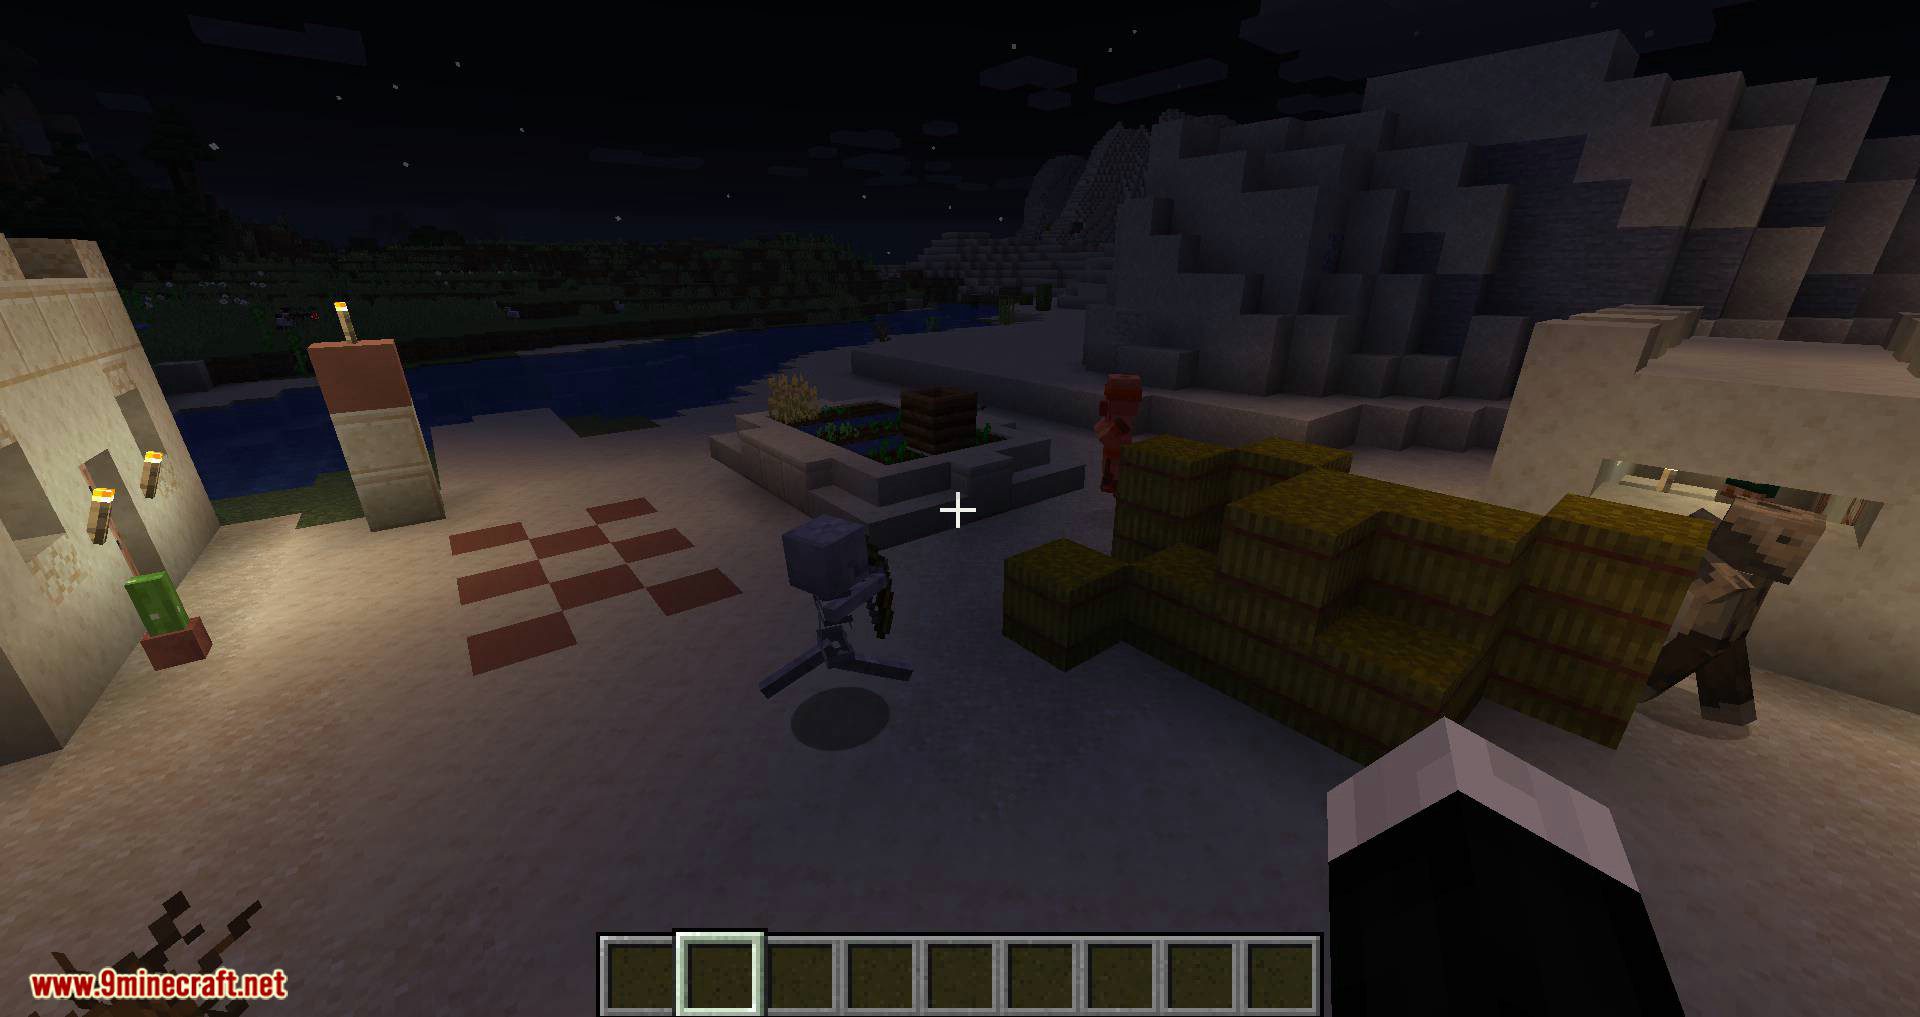 All Mobs Attack Villagers Mod 1.15.2, 1.14.4 (More Chaos in the Village in Night) 4